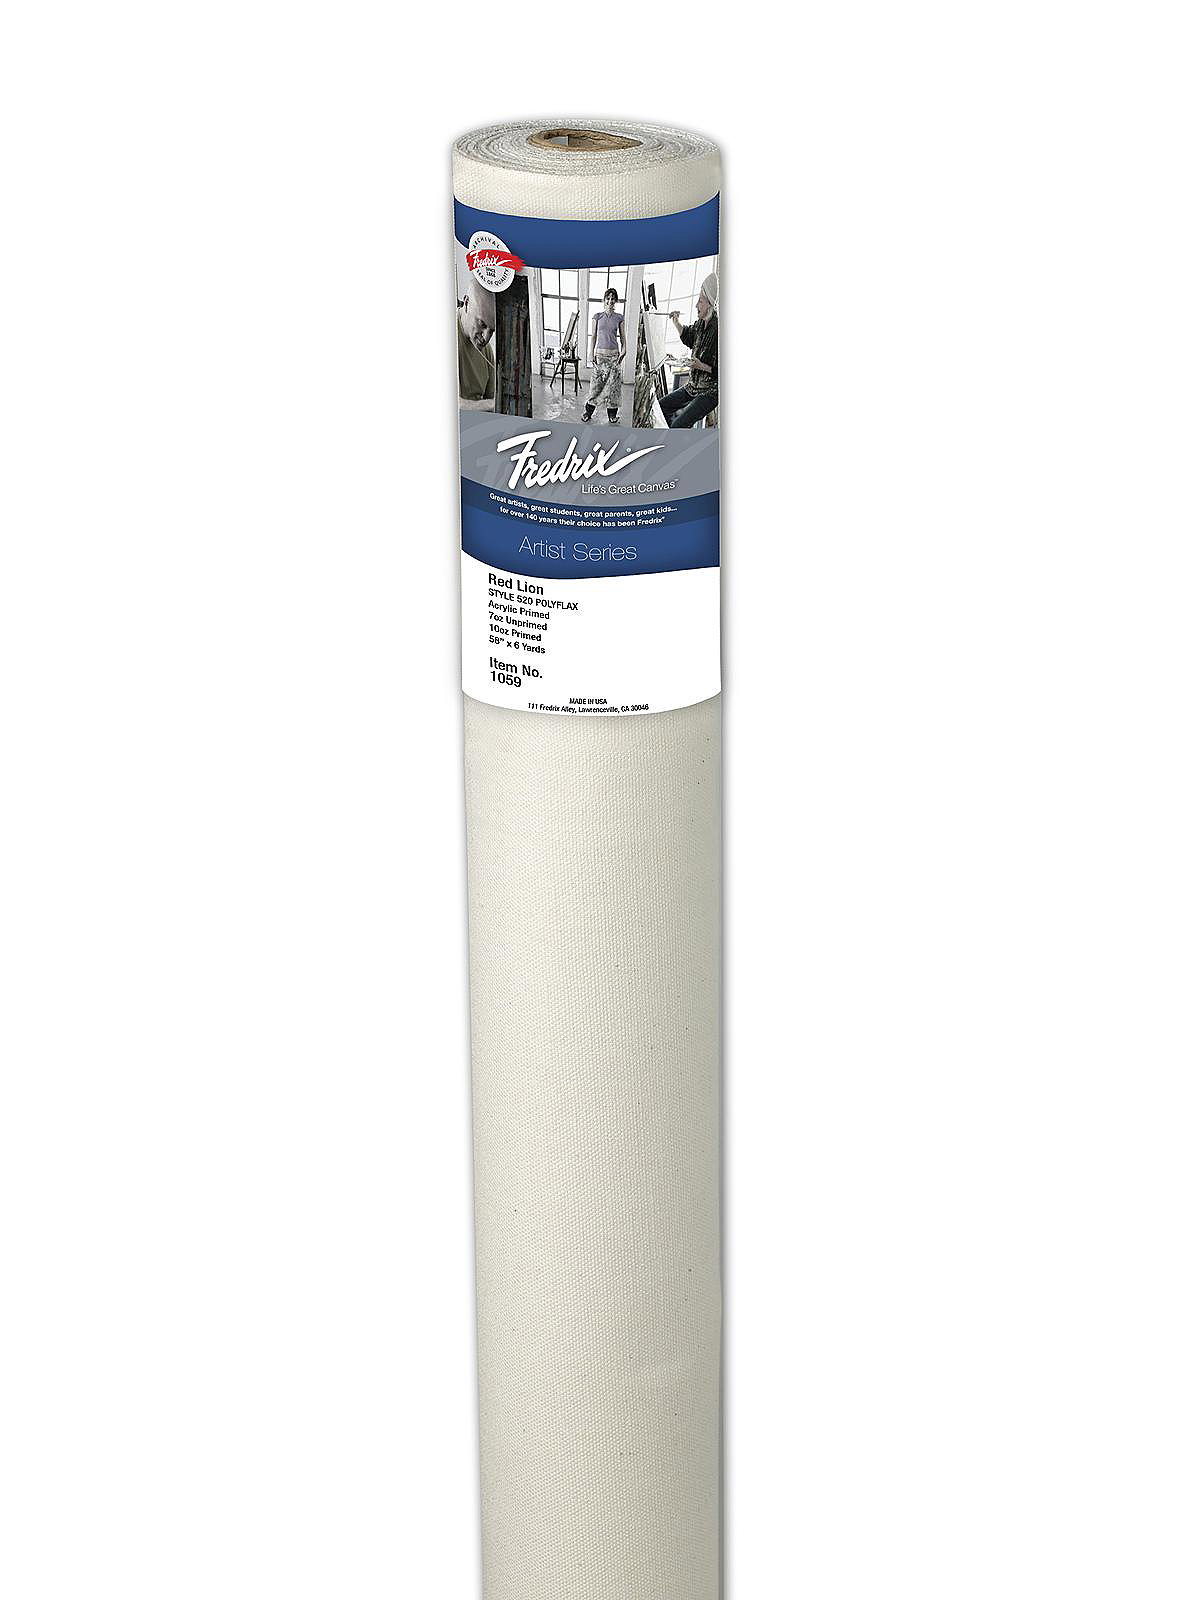 Fredrix PRO Series Oil Primed Linen Stretched Canvas - 1-3/8 Deep